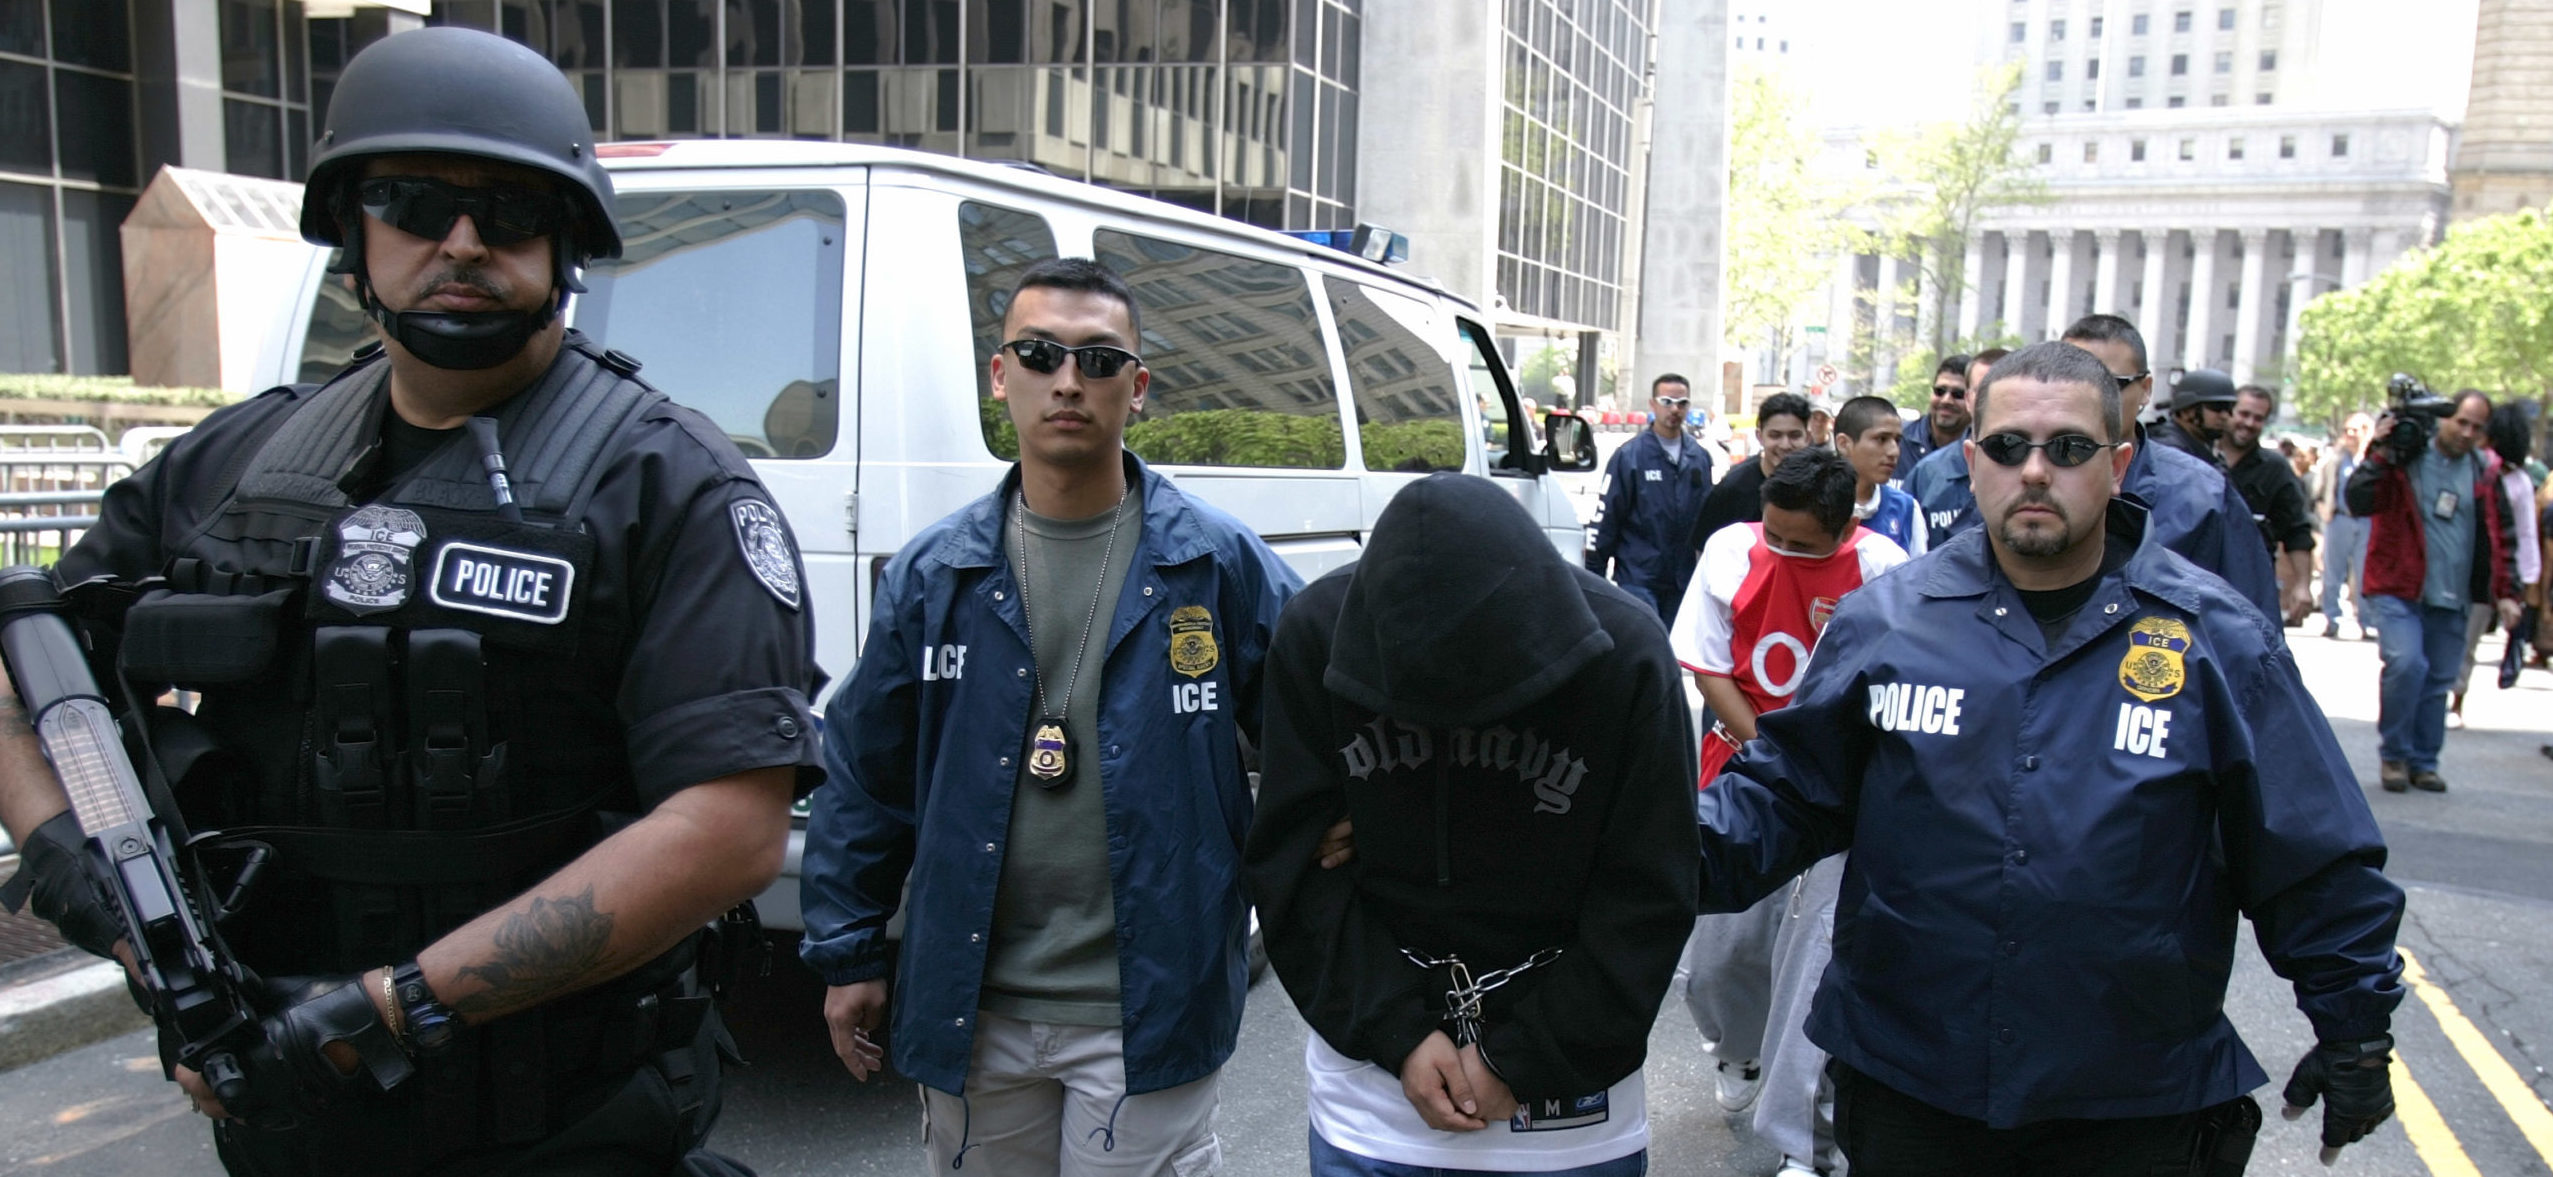 NEW YORK - MAY 11: Special agents working for Immigration and Customs Enforcement (ICE) escort members of a Mexican gang to court following their arrests May 11, 2005 in New York City. The gang members from the Mexican Mafia are illegal residents and will be deported by officials. ICE officers are part of the federal government's Department of Homeland Security. (Photo by Robert Nickelsberg/Getty Images)